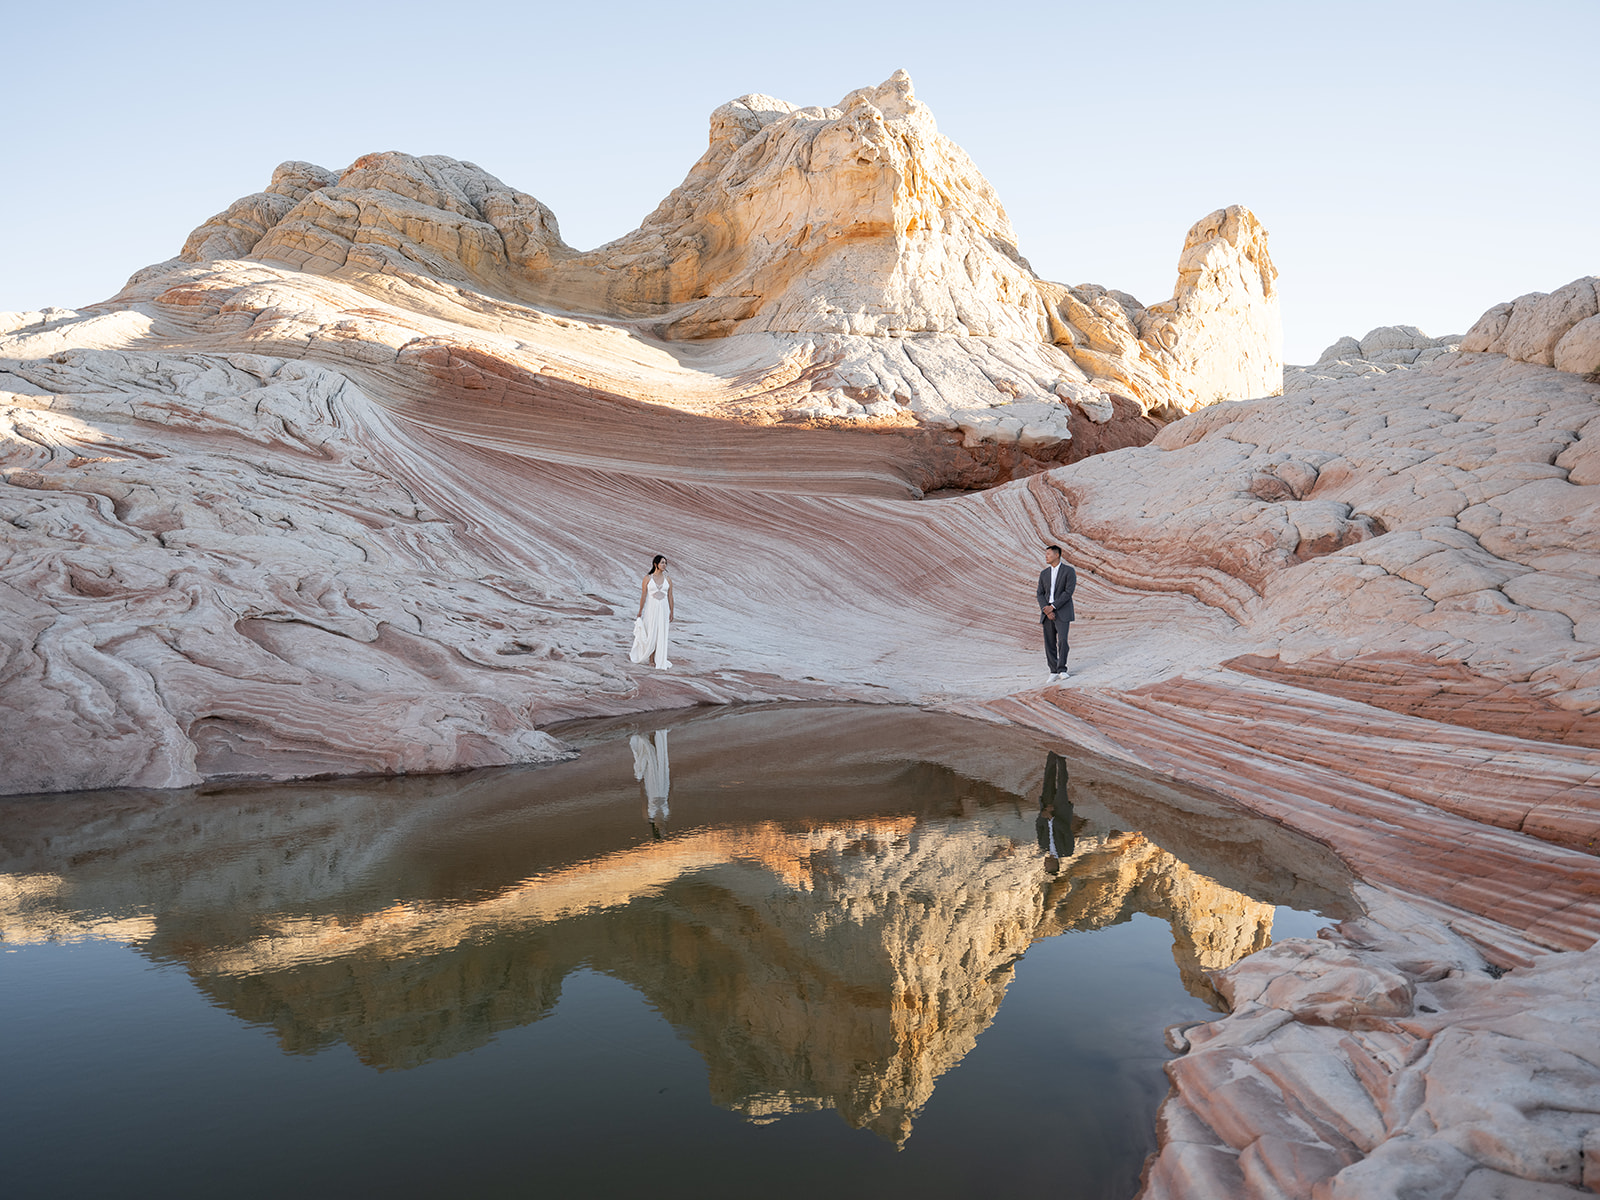 Couple eloping in the beautiful and secluded White Pocket, Arizona